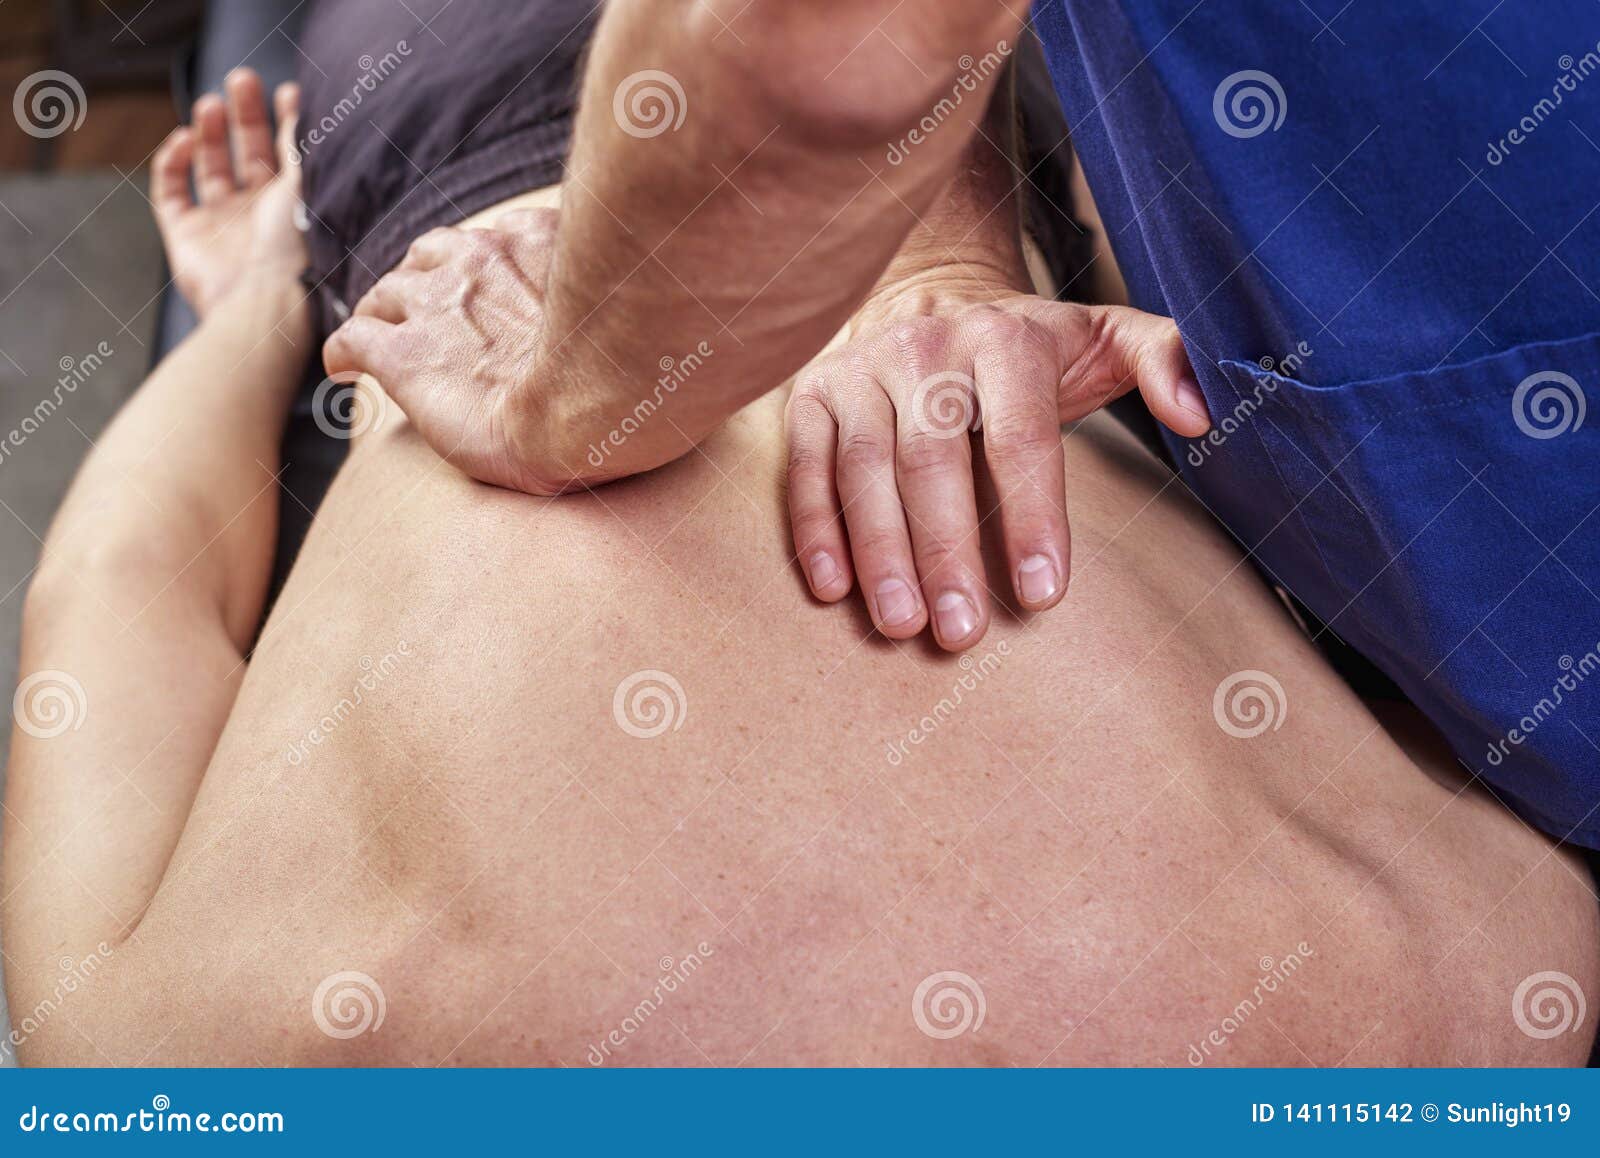 physiotherapist giving a back massage. chiropractic, osteopathy, manual therapy, acupressure